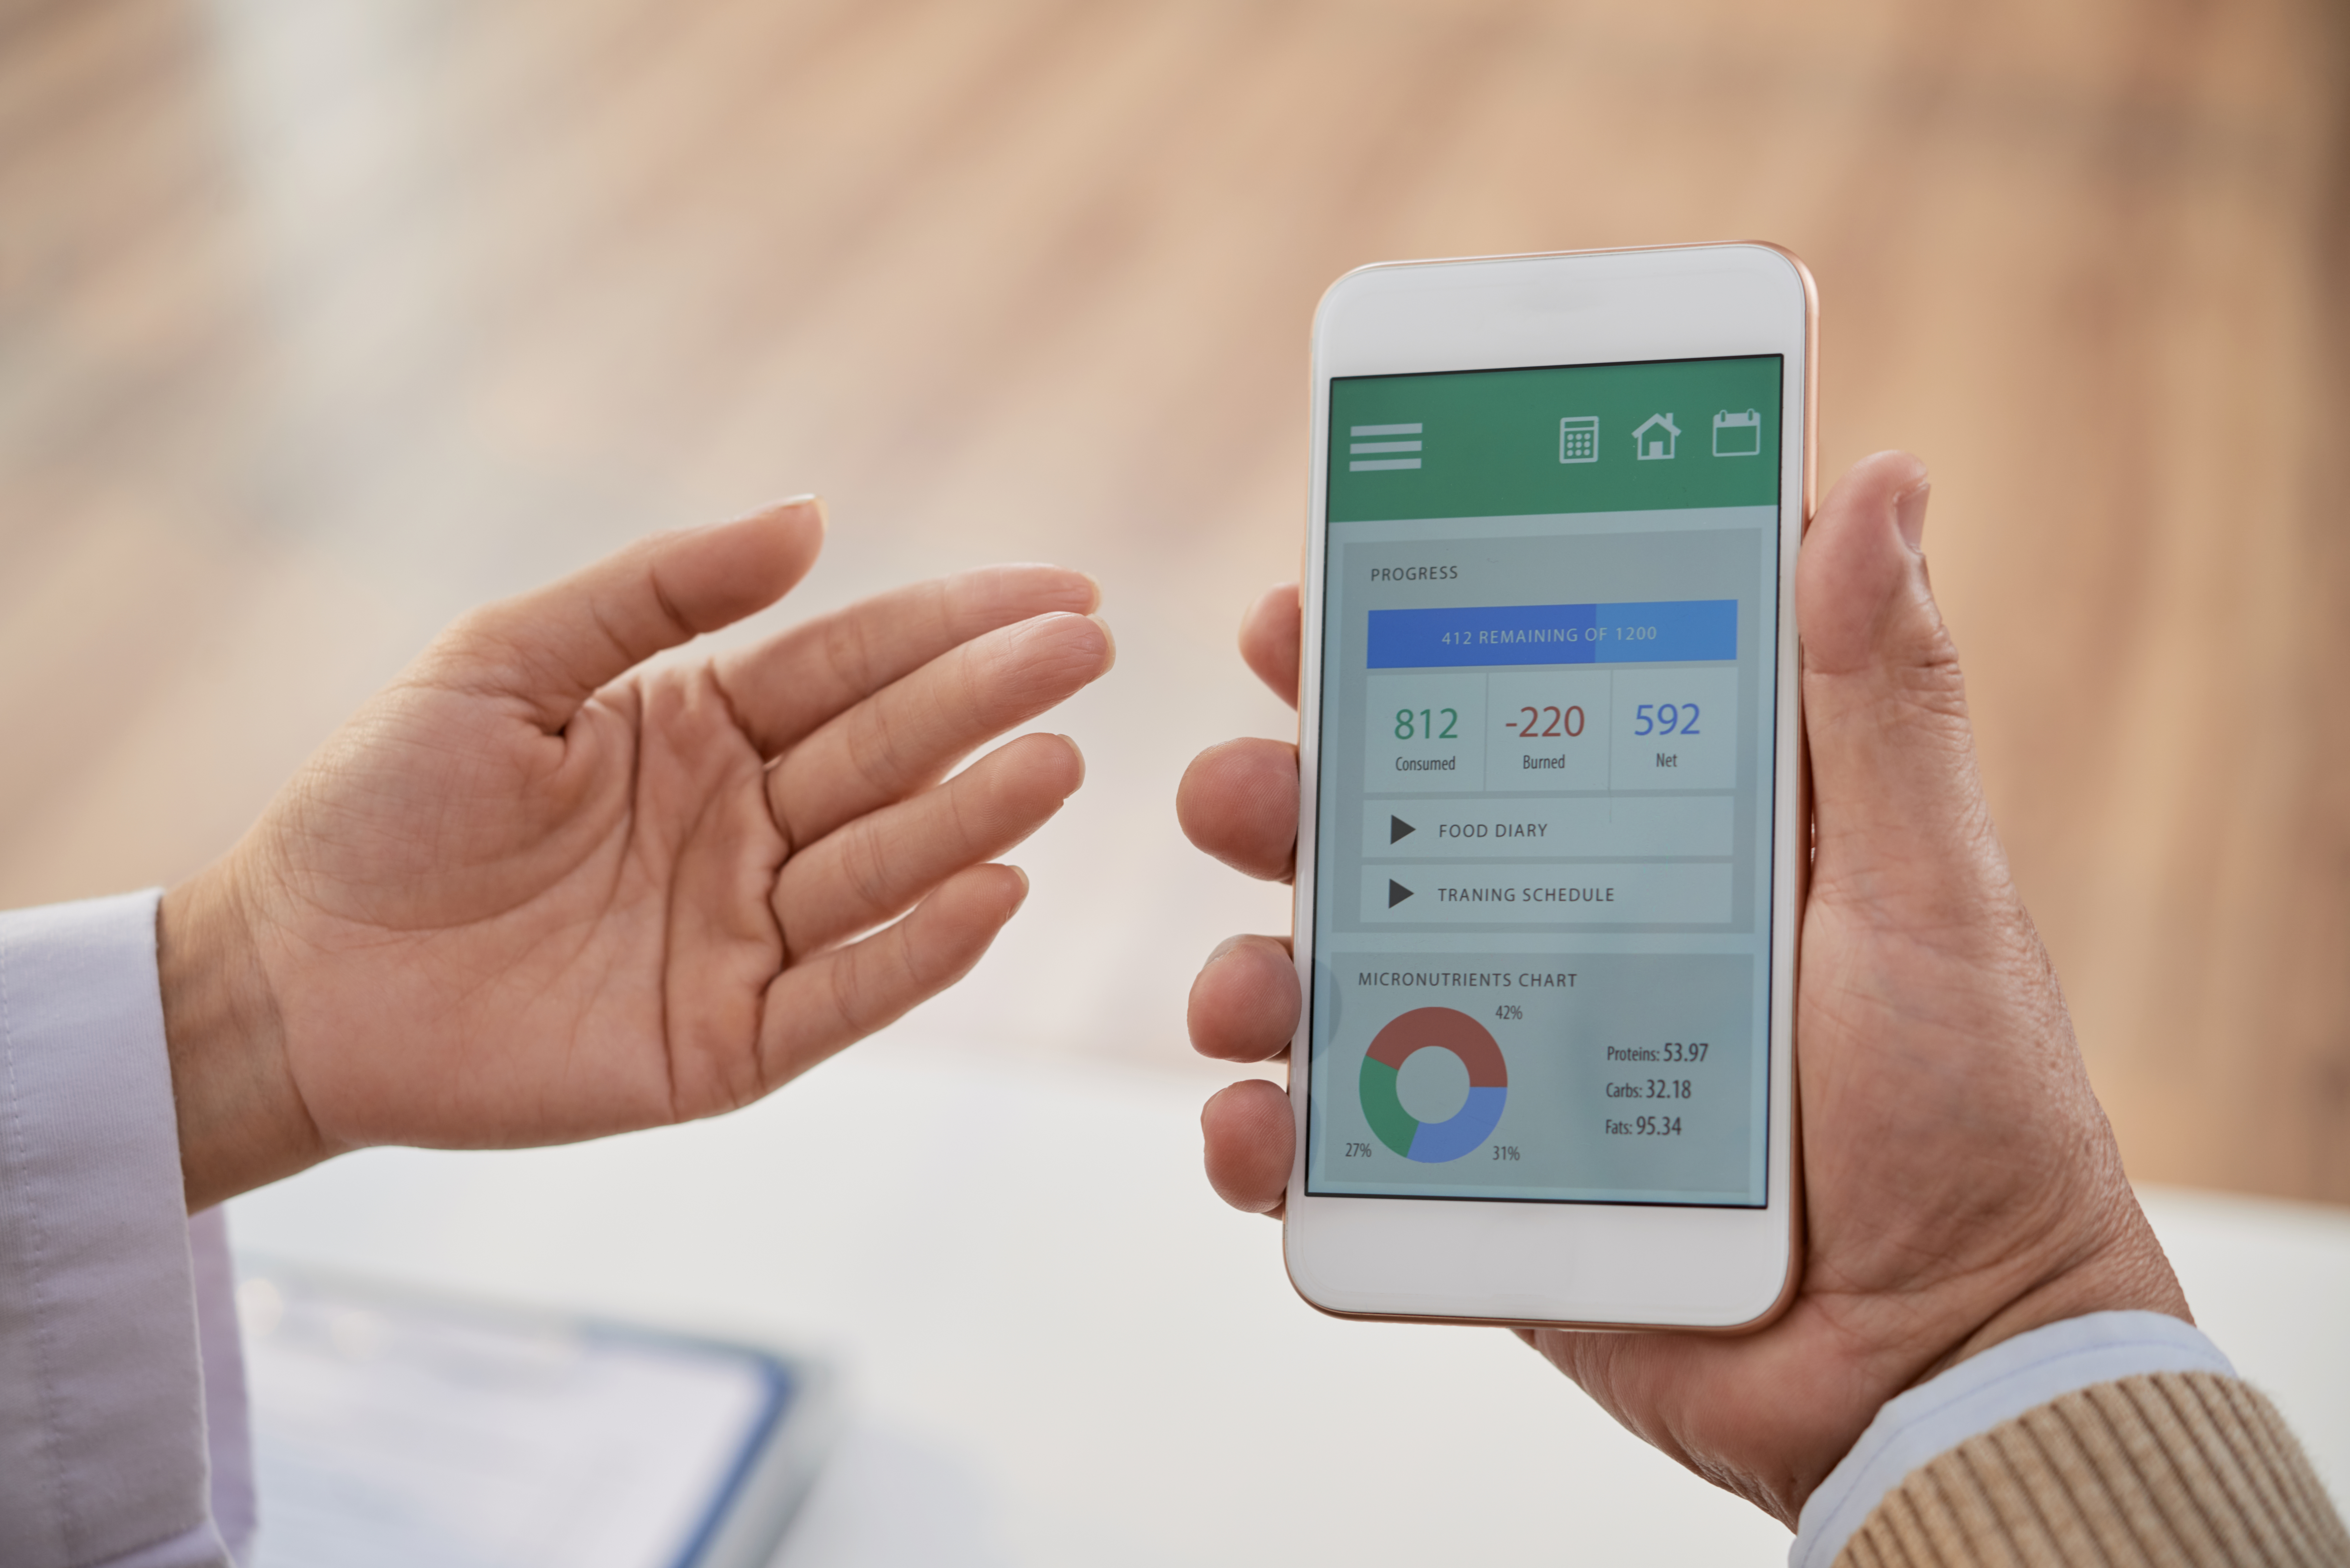 Teaching Patient to Use Health Monitoring App